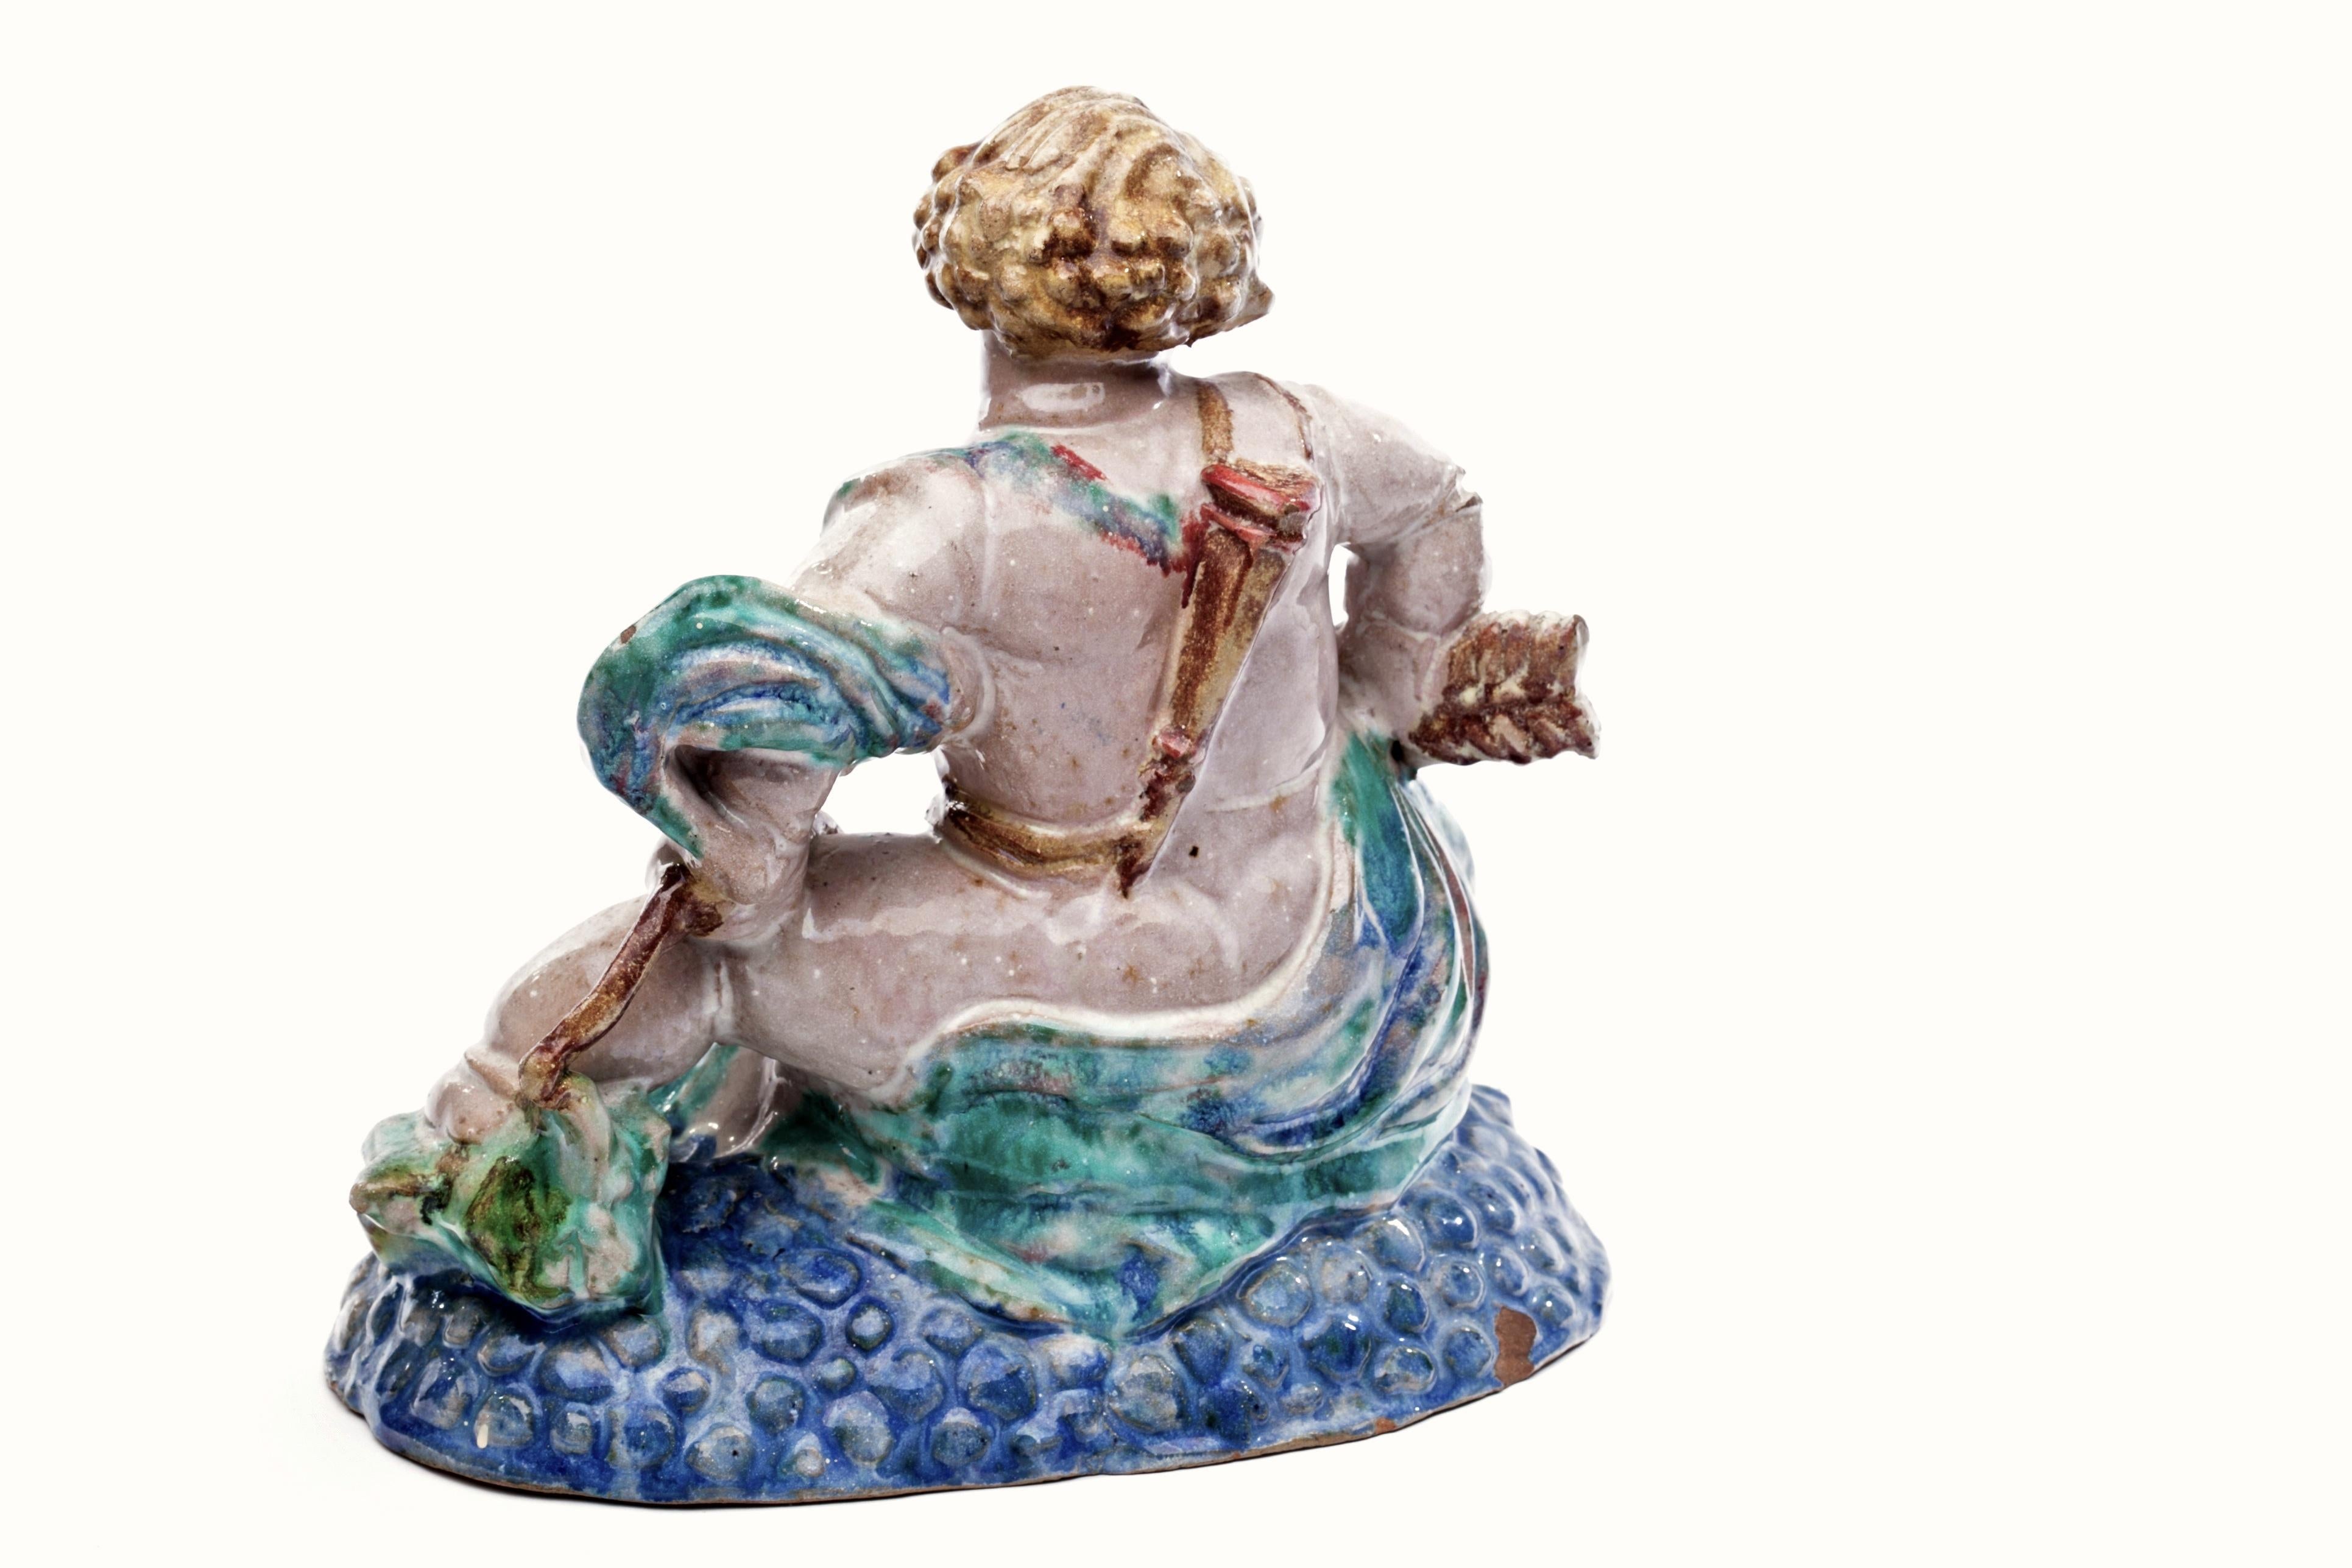 Exceptional Austrian Putto in the style of Michael Powolny with bow, arrow and quiver on his back sitting on a colorful bed of blue bubbles. Magnificent stoneware sculpture with rich yet subtle glazes. Fabulous chunky feet. Signed.

keywords: